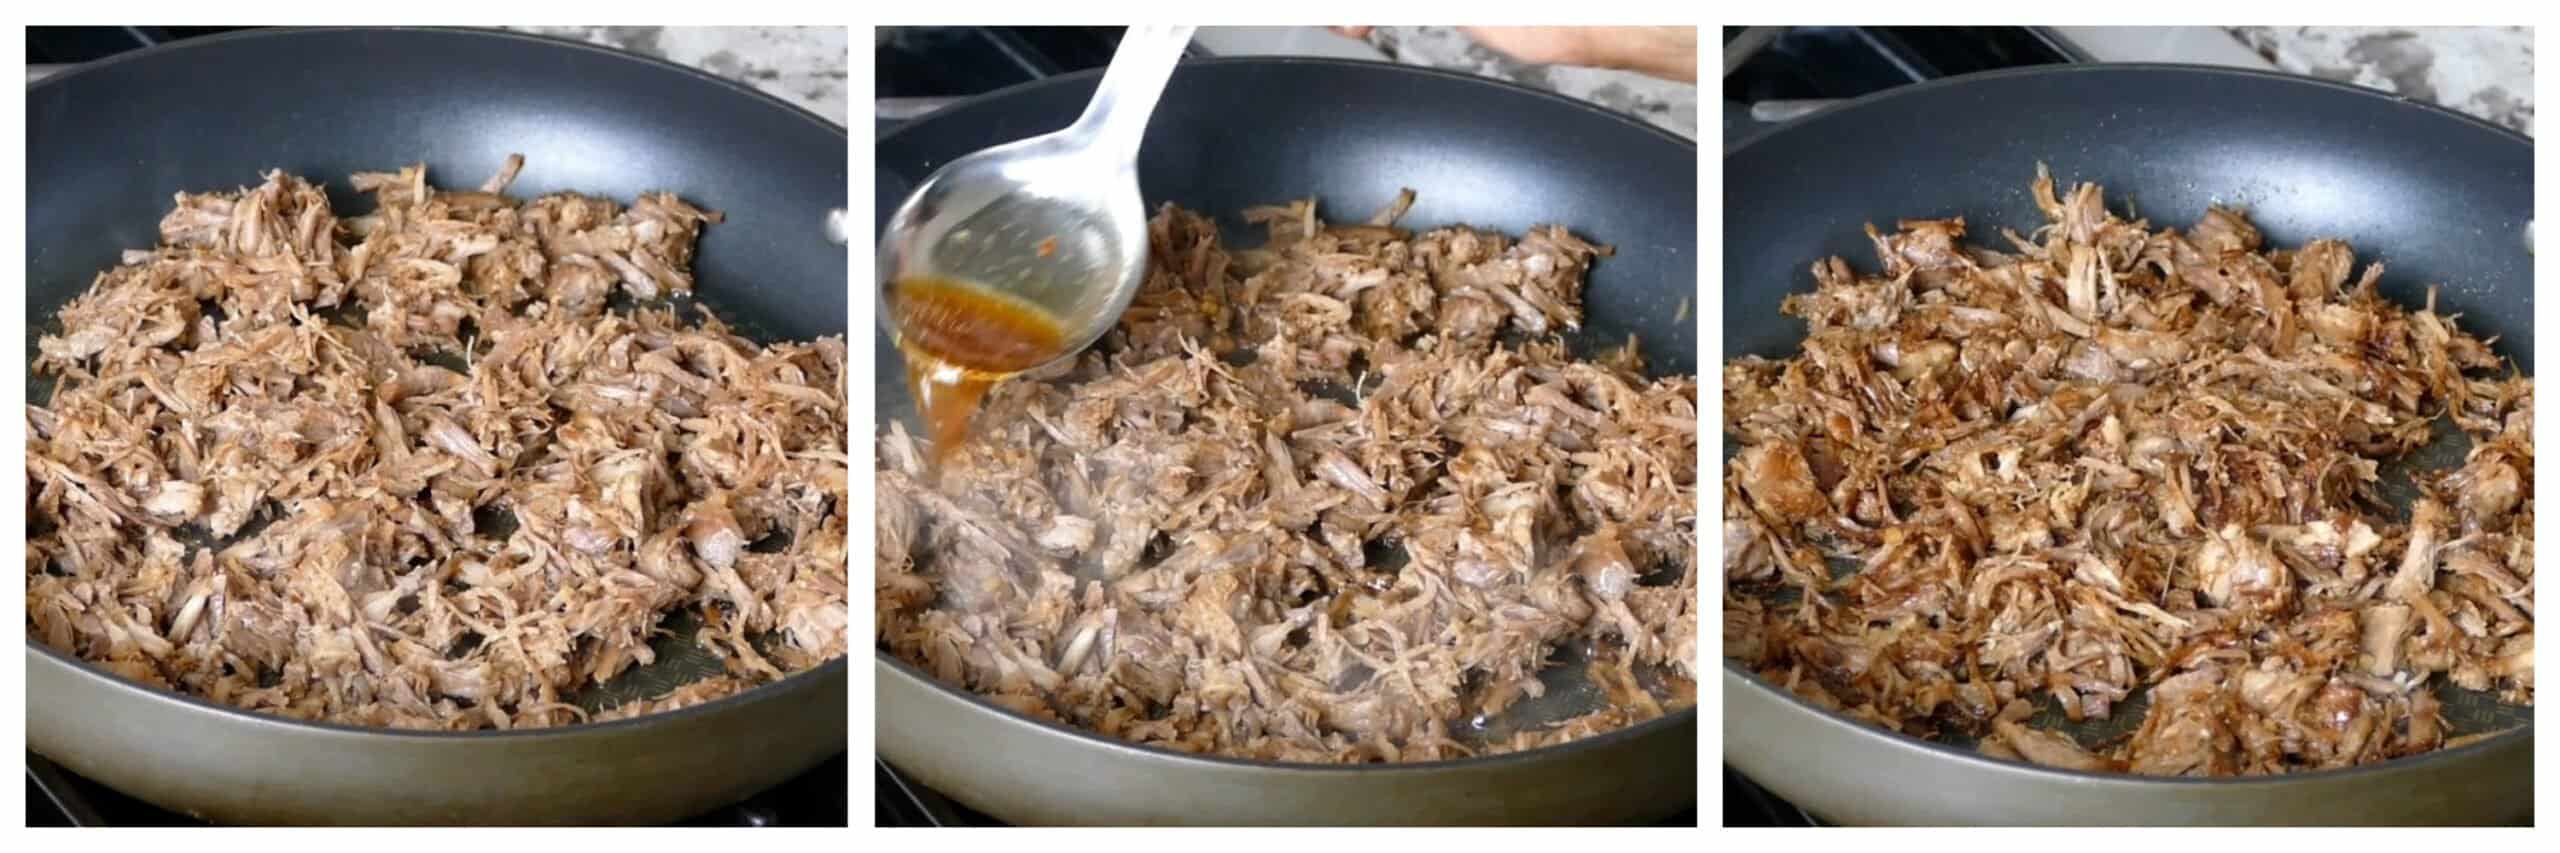 Instant Pot Asian Pulled Pork Instructions collage - pork in frying pan, add sauce, pork fried